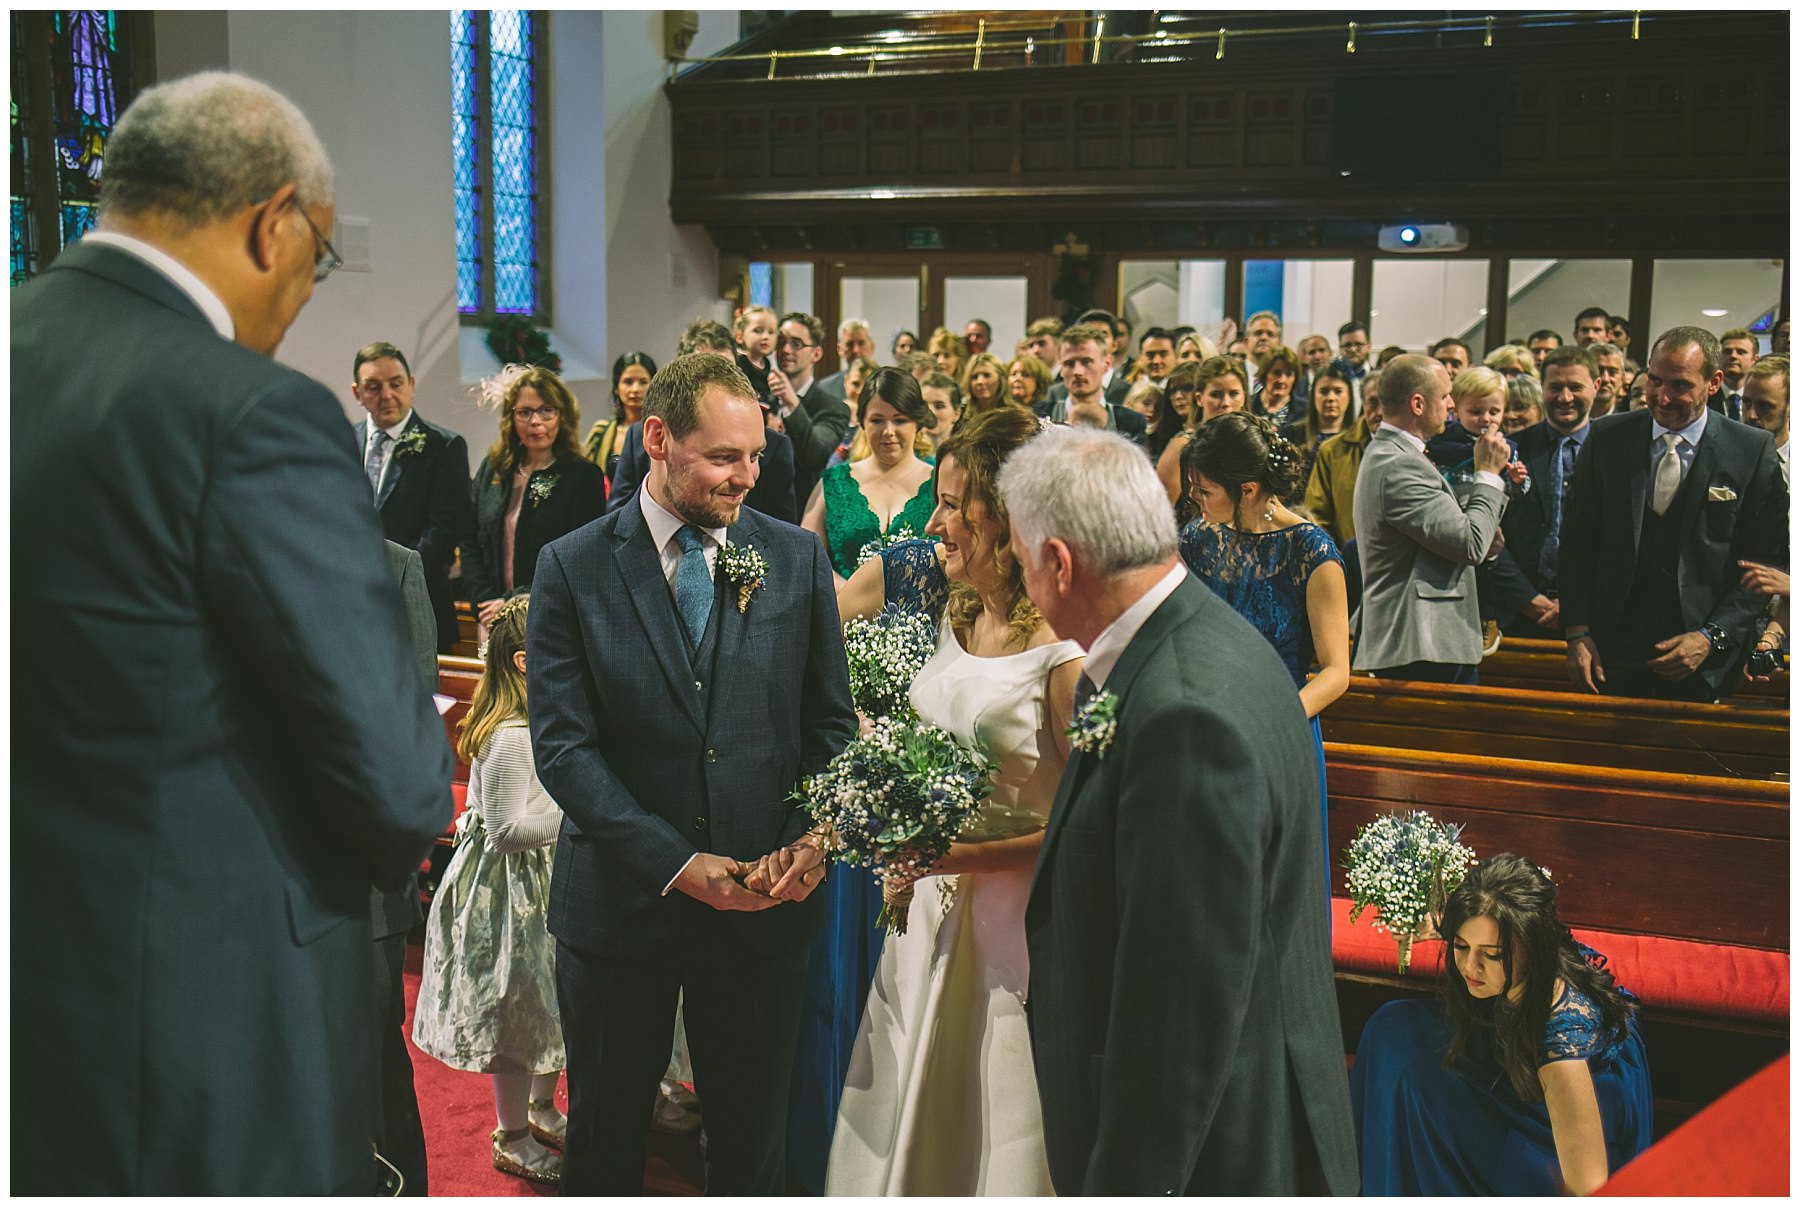 Groom sees his bride for the first time at ramsbottom wedding